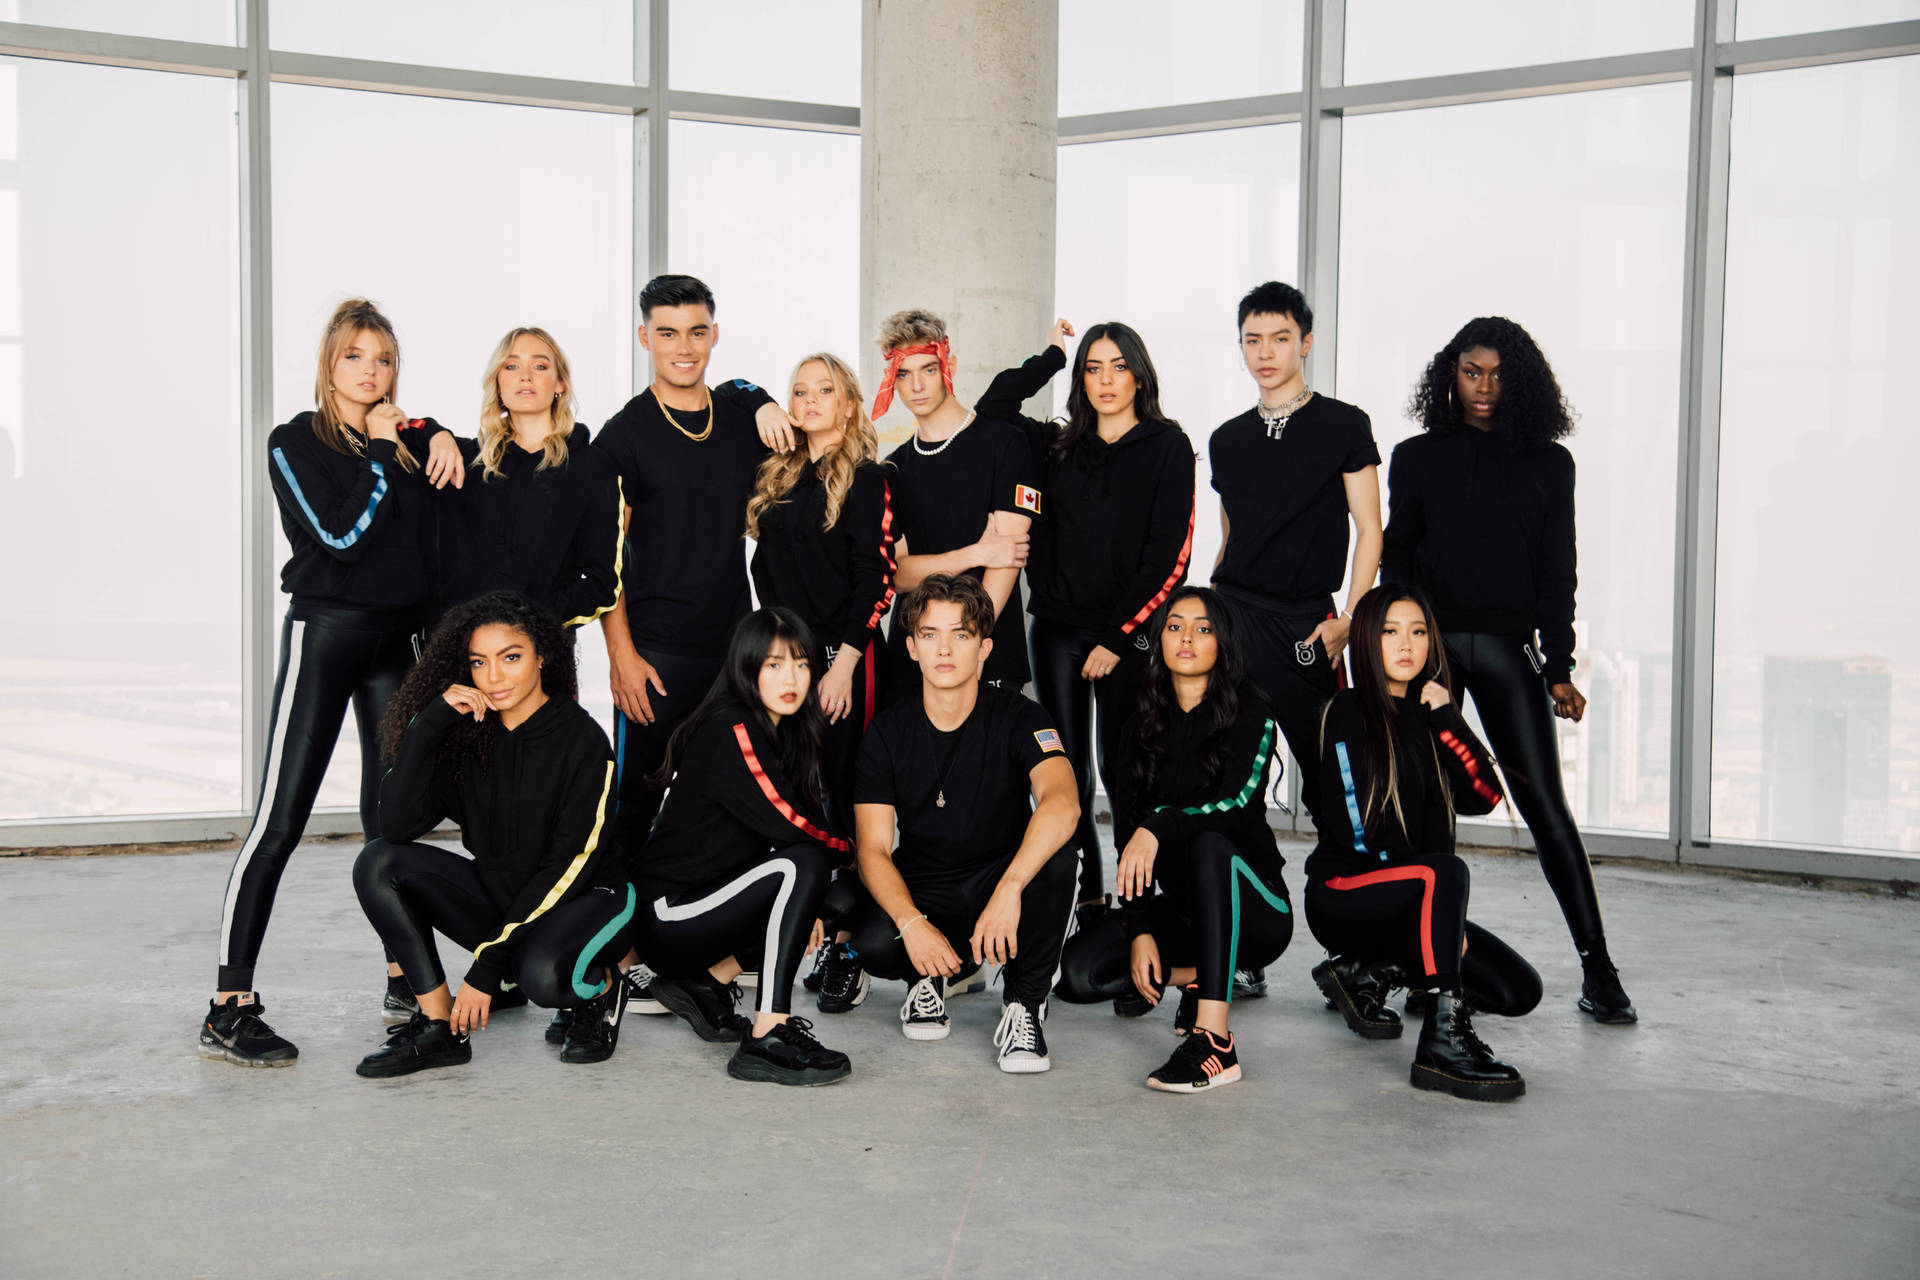 Now United Members Showcasing Unity and Diversity in Black Attire Wallpaper